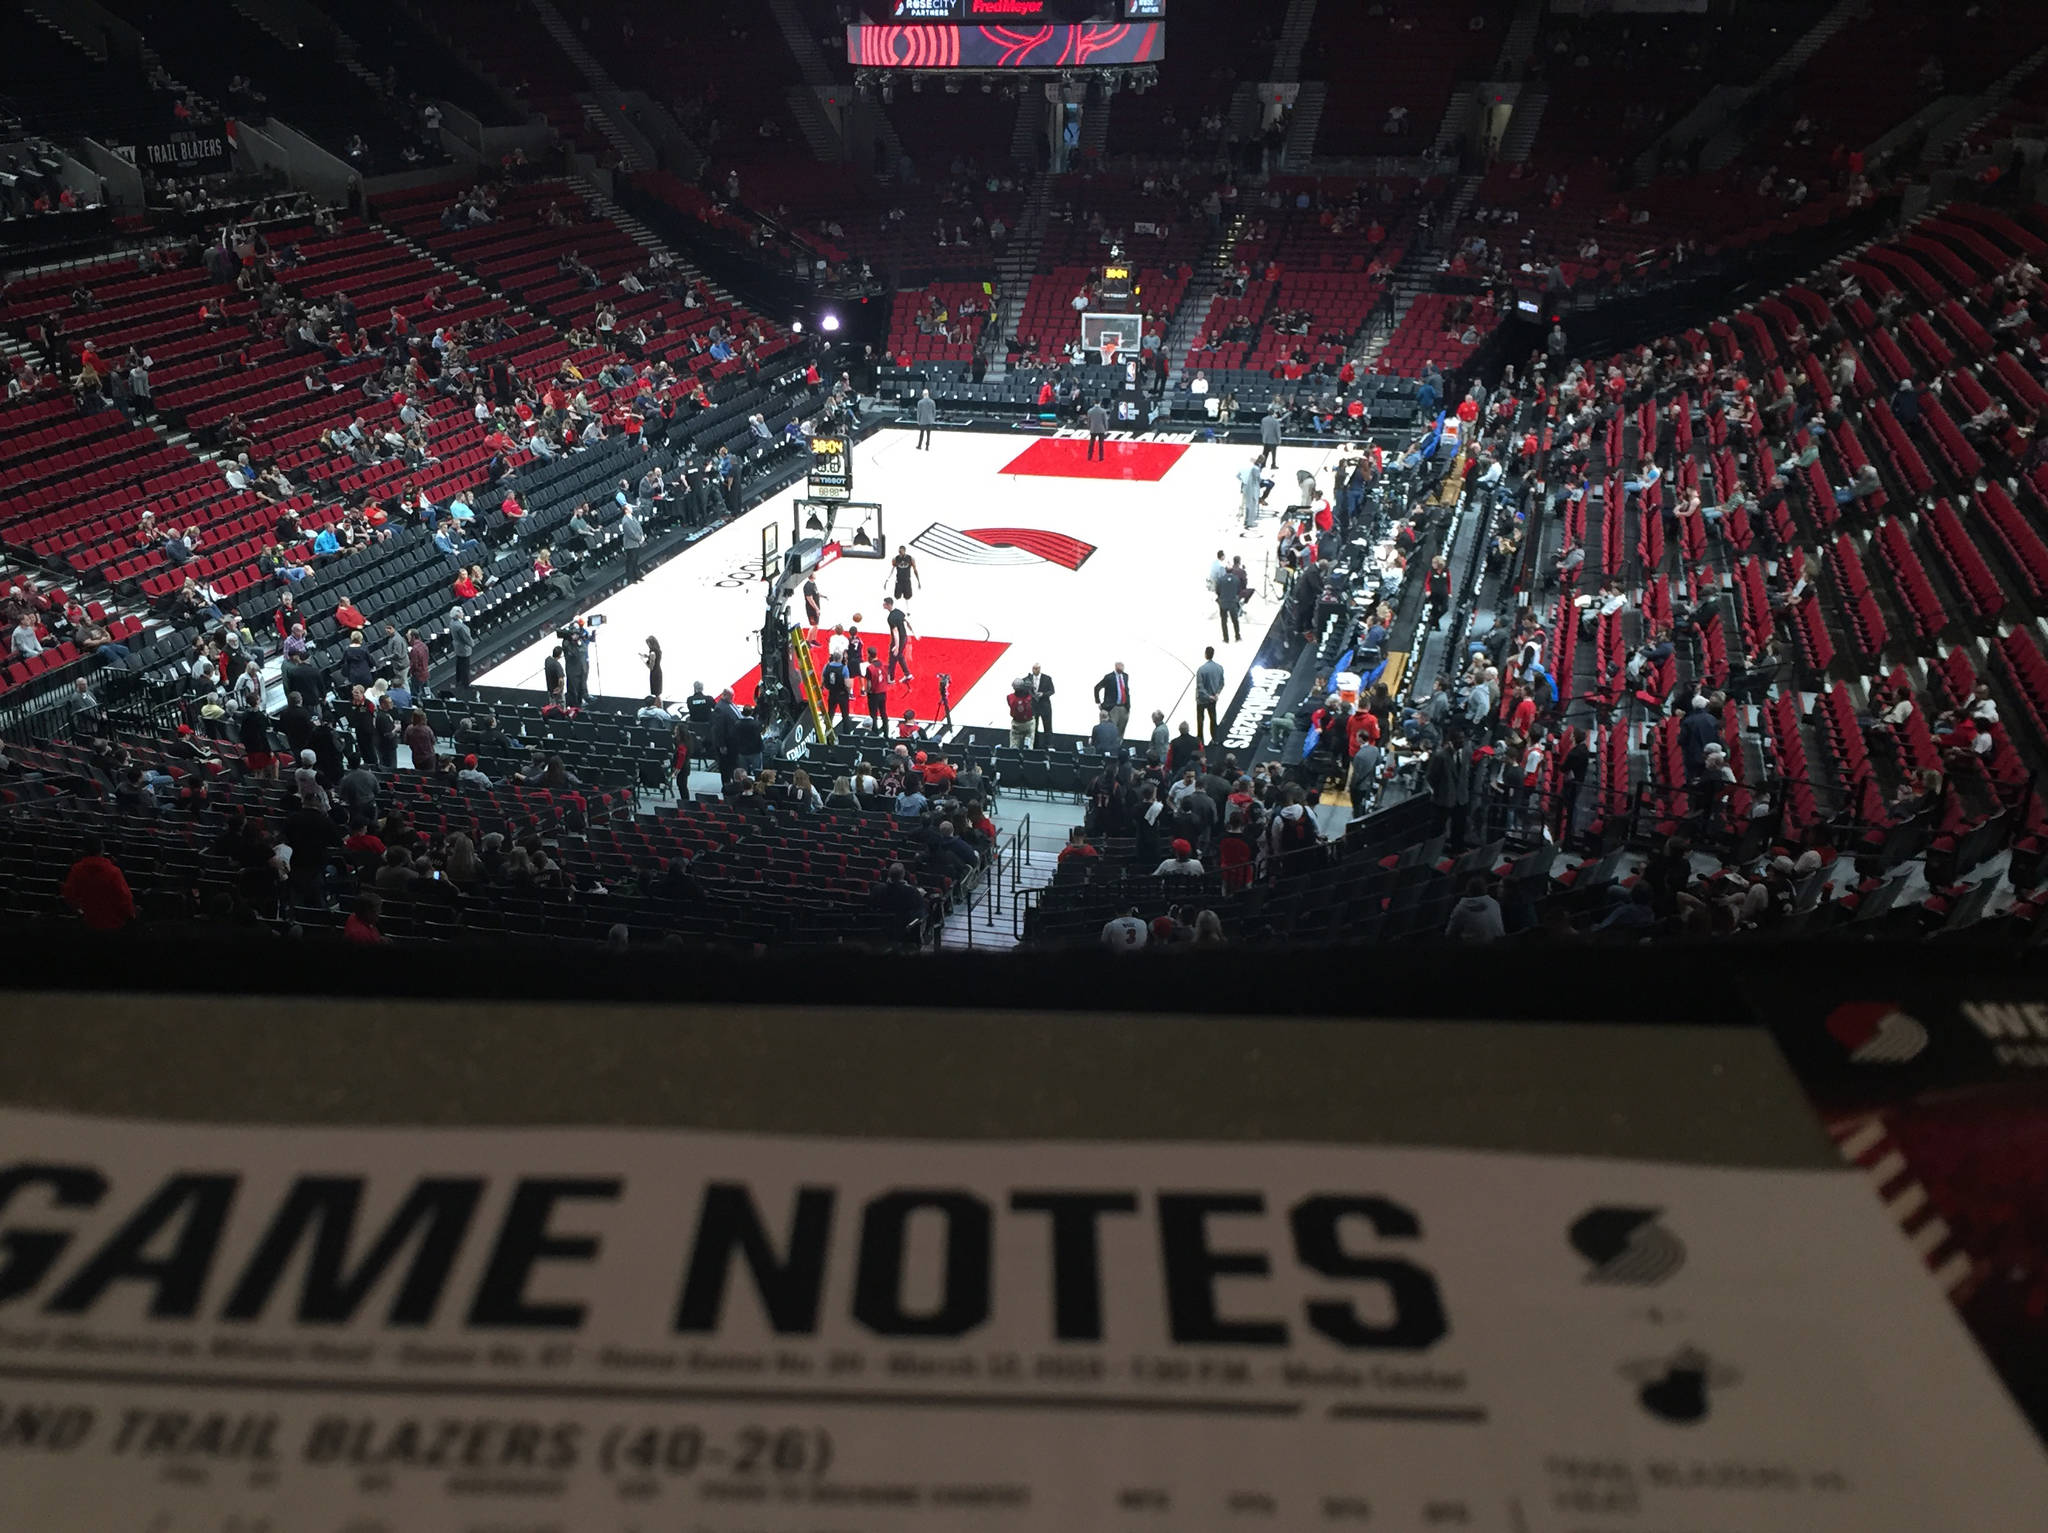 I was assigned a seat in section 207 for my coverage of the Portland Trail Blazers’ March 12 game against the Miami Heat at the Moda Center in Portland. (Nolin Ainsworth | Juneau Empire)